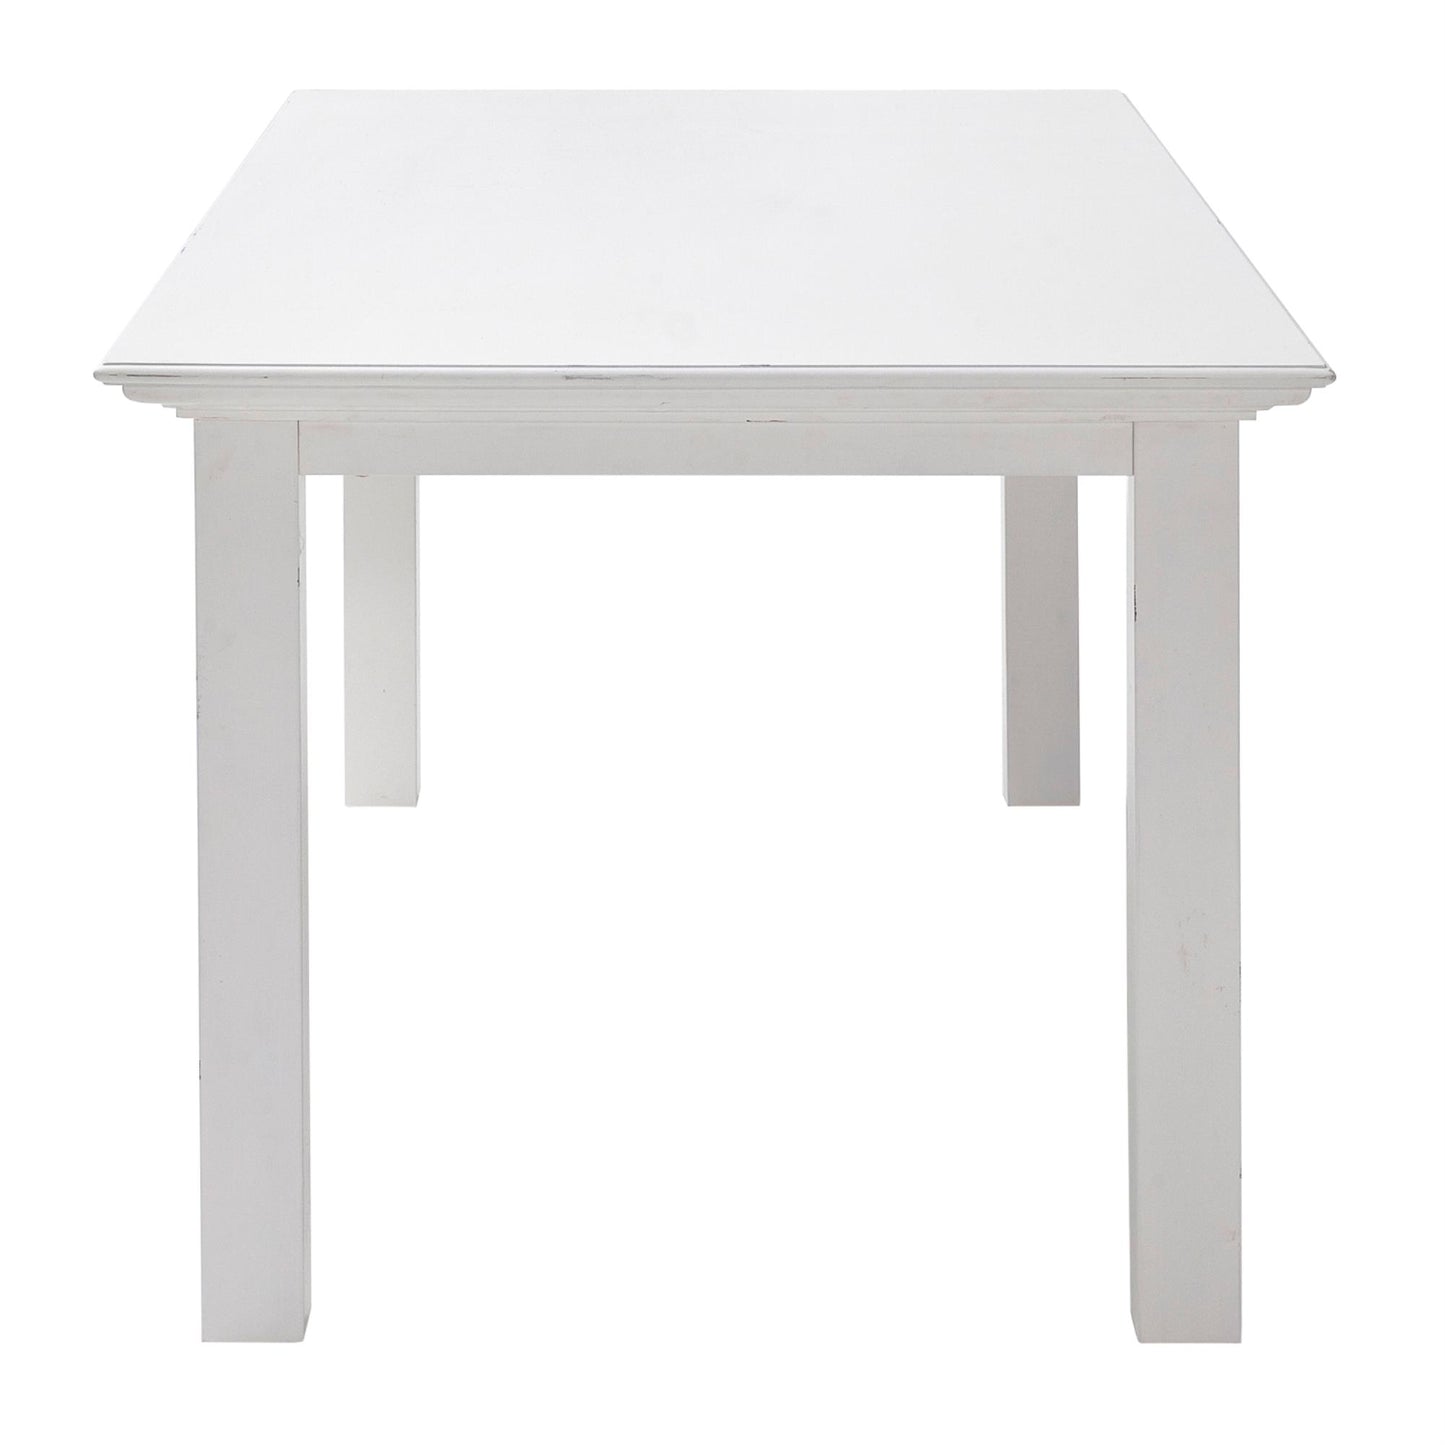 Copy of Provence collection by Nova Solo.  71" Dining Table CasaFenix